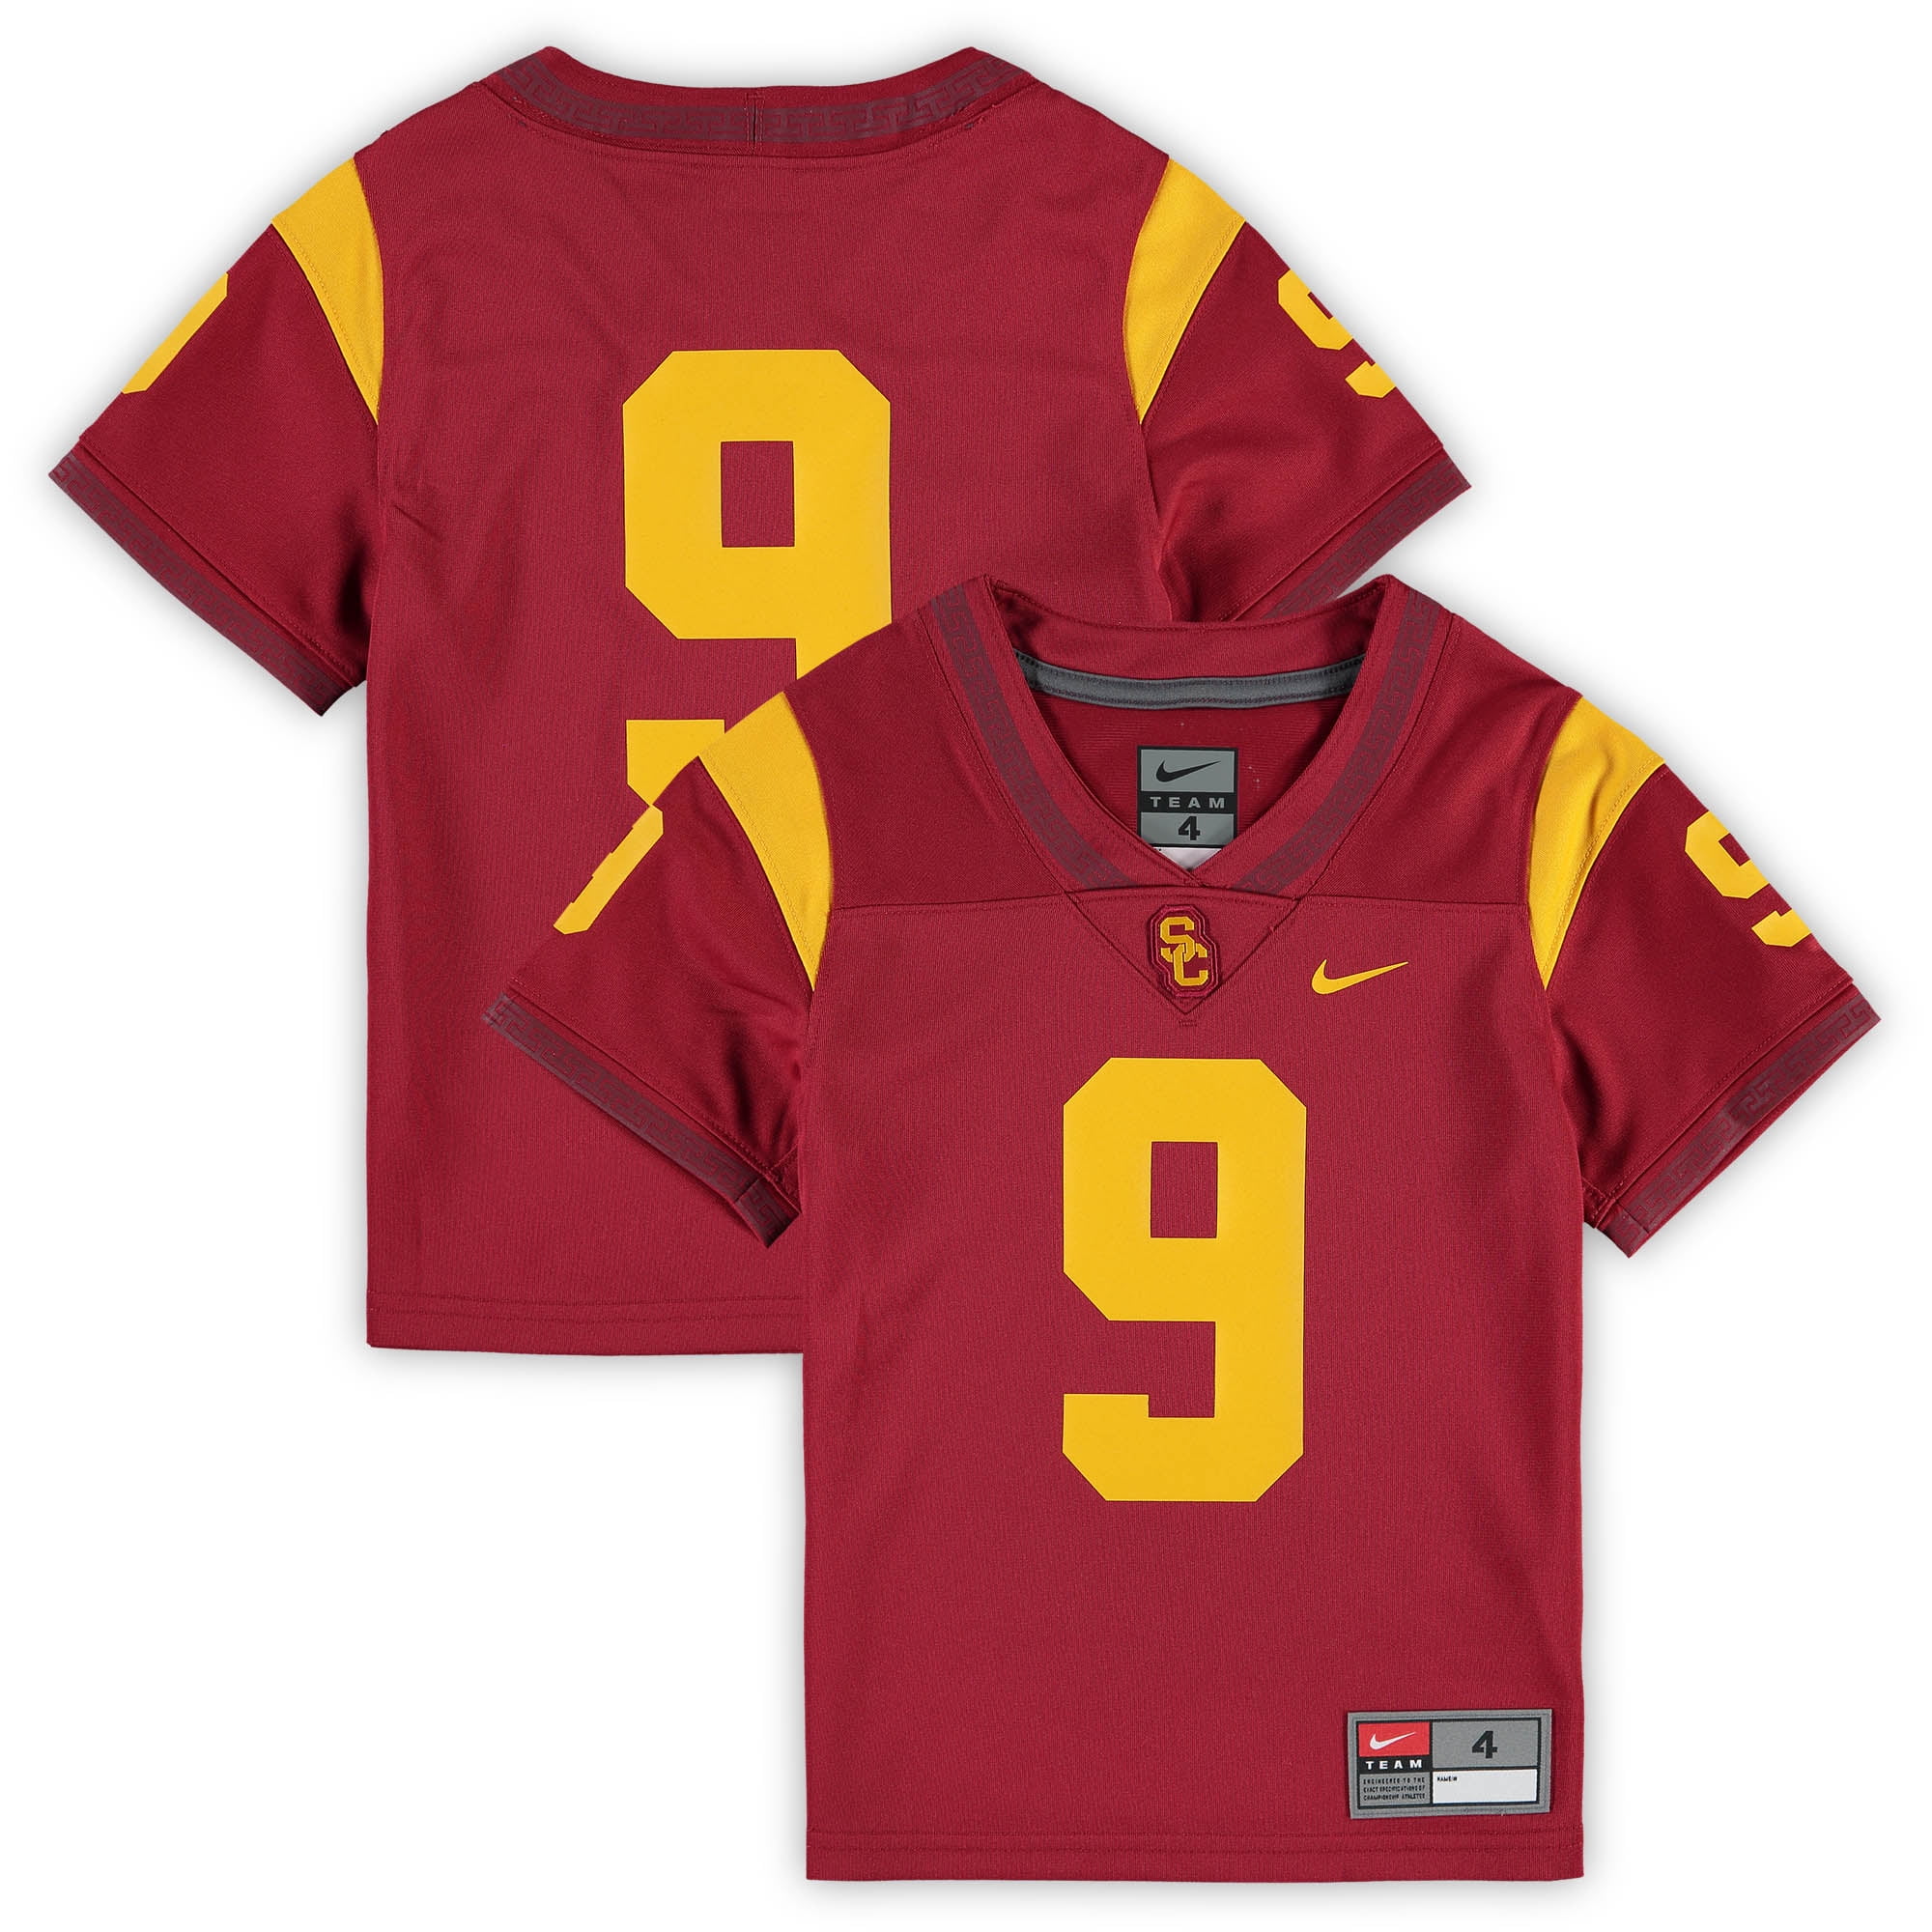 usc number 9 jersey